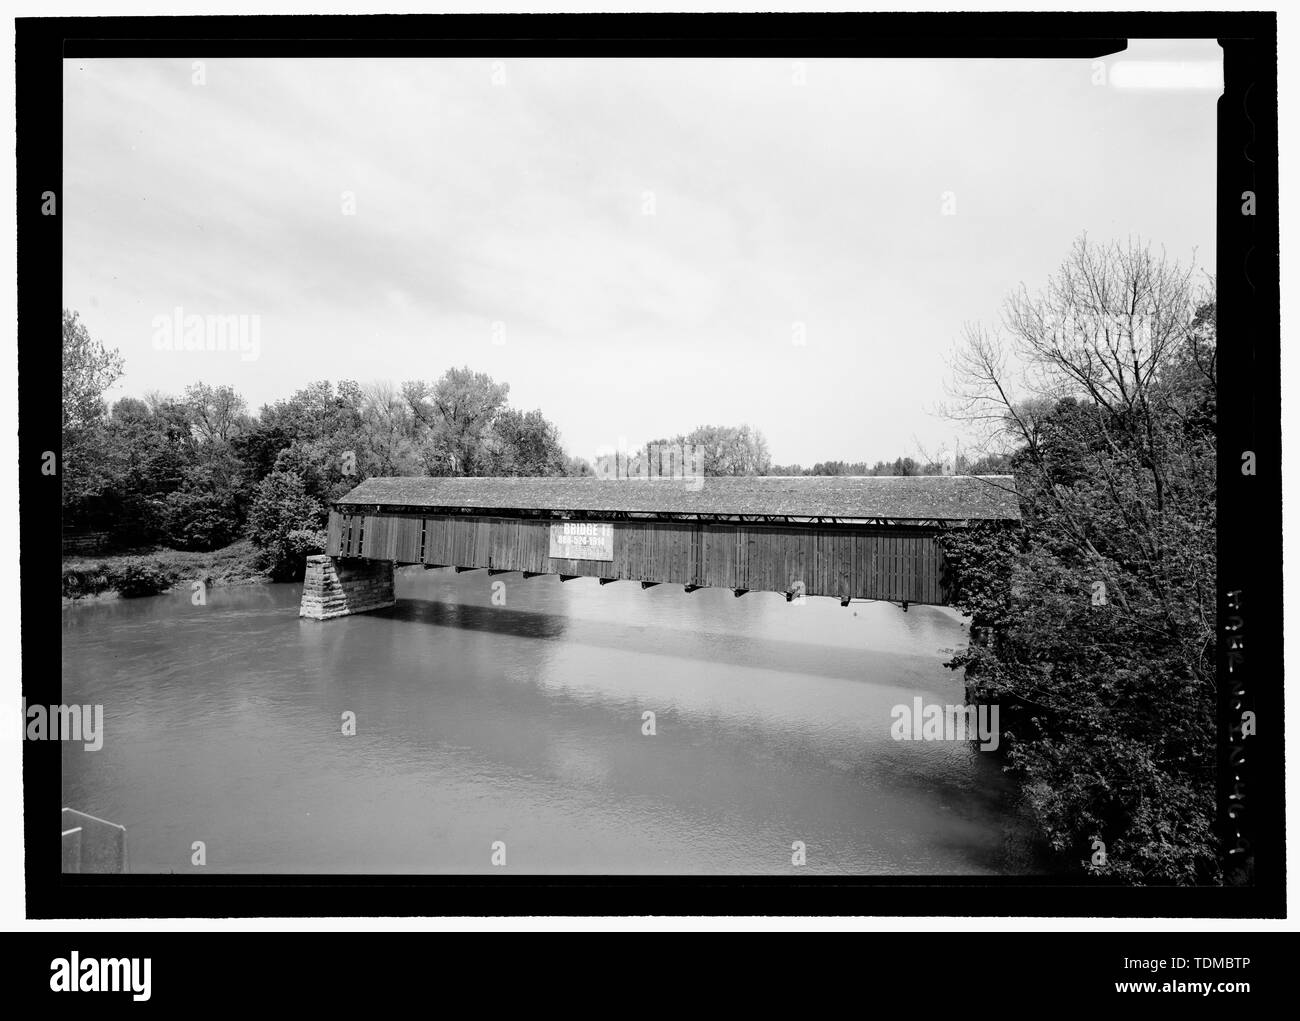 PERSPECTIVE VIEW FROM SOUTHWEST. - Bells Ford Bridge, Spanning East Fork White River at State Route 258, Seymour, Jackson County, IN; Pattison, Robert; McNairy, Claflen and Company; Post, Simeon S; Post, Andrew; Hull, W L; Blish, John H; Bell, Isaac; Claflin, Henry; McNairy, Albert; Seymour Citizen's Association; Seymour Bridge Company; J.A. Barker Engineering; Union Pacific Railroad; Cleveland Bridge and Car Works; Atlantic Bridge Works; L.B. Bloomer and Company; Watson Manufacturing Company; Detroit Bridge Works; J.H. Cofrode; Christianson, Justine, transmitter; Marston, Christopher, project Stock Photo